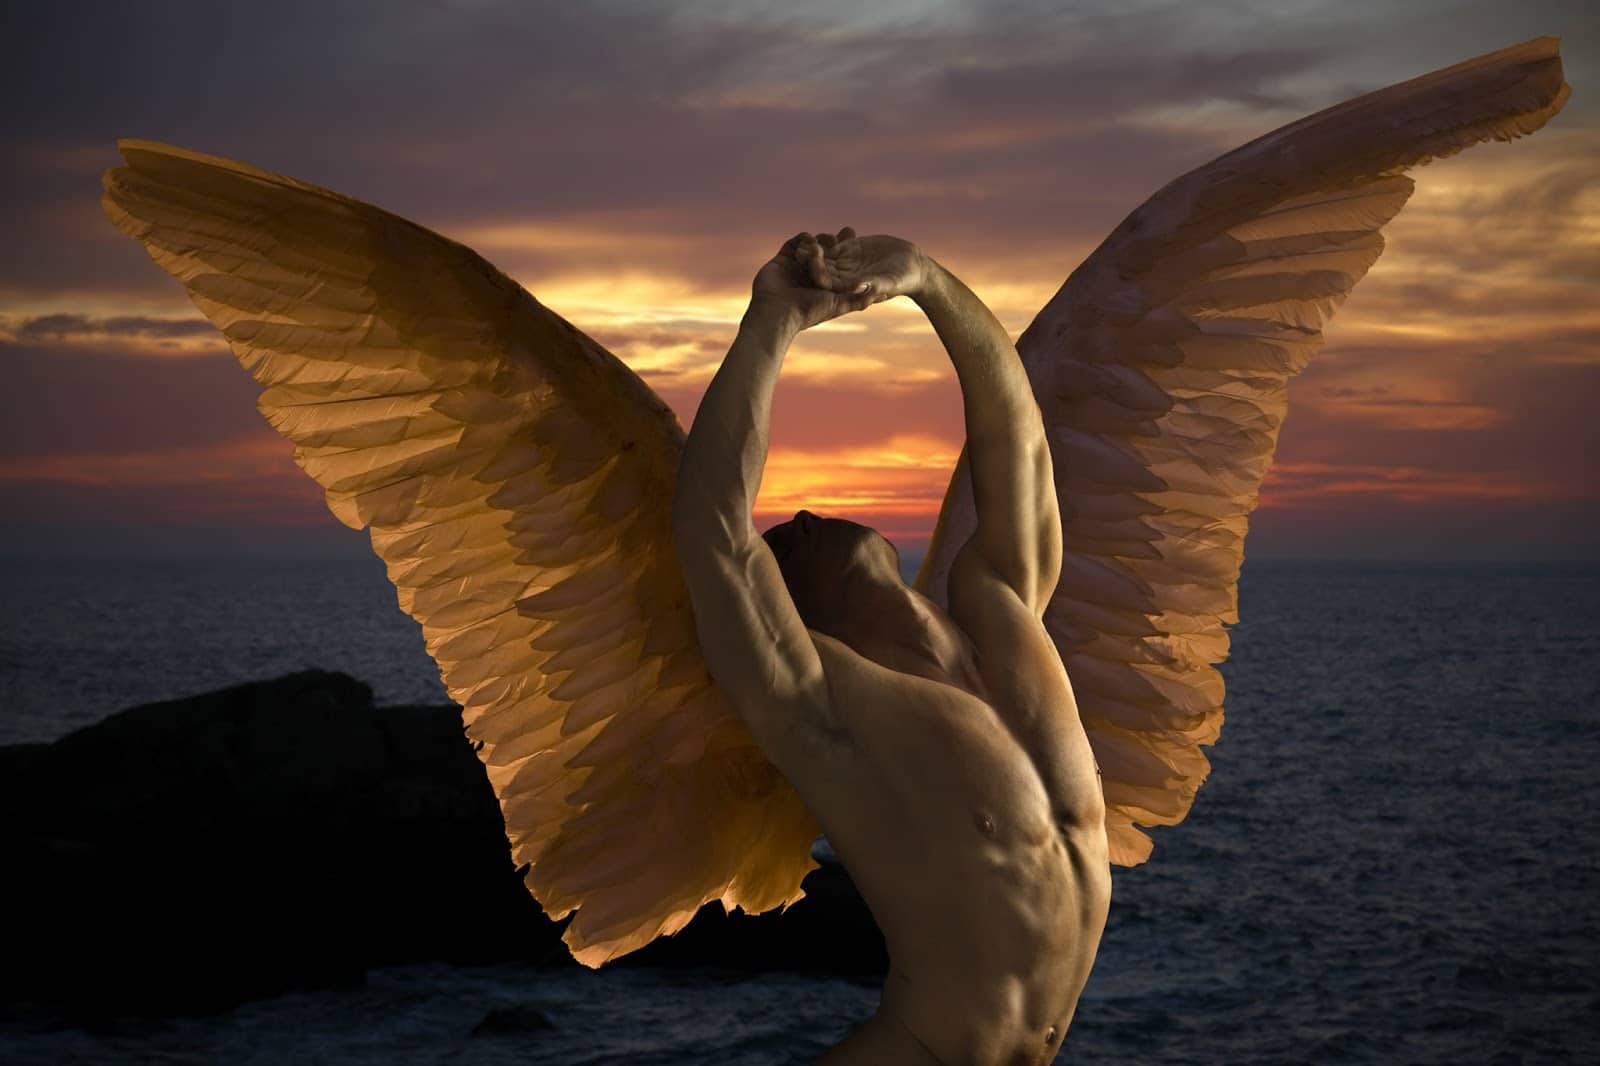 Nephilim and Fallen Angels, Ancient texts suggests these mythical beings were, in fact, real.